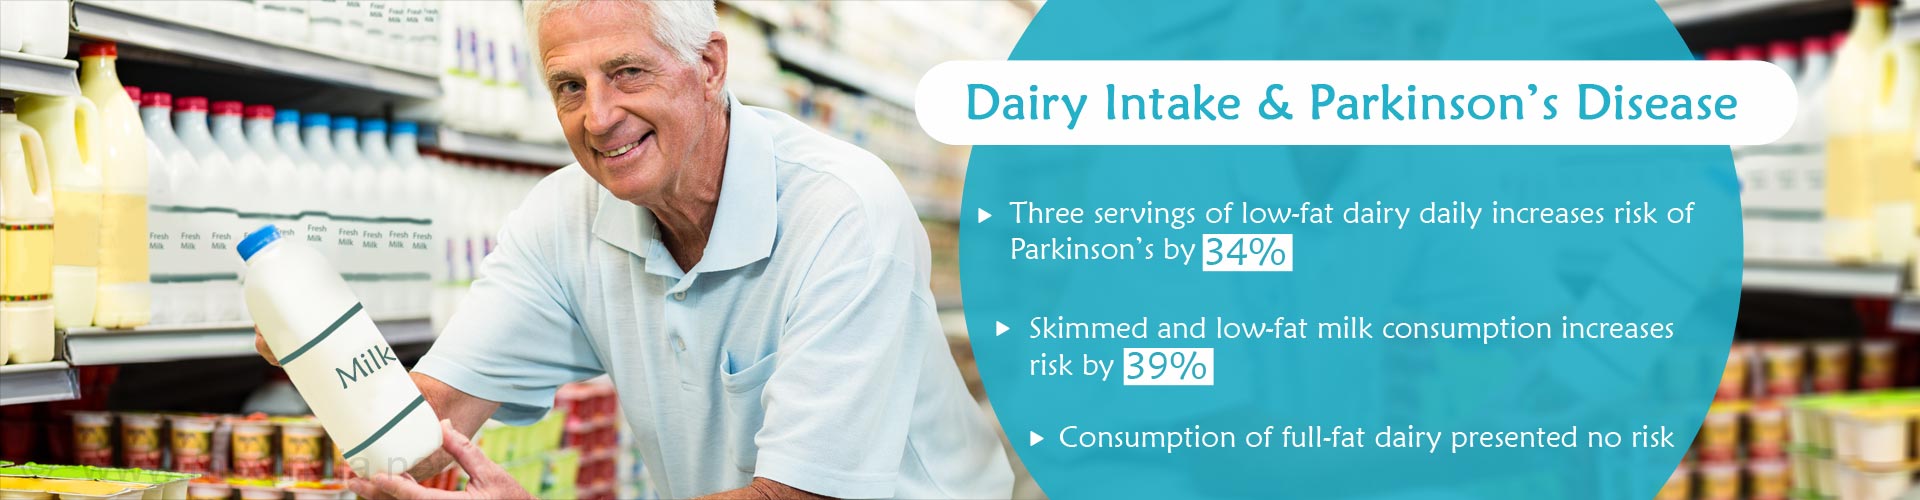 Dairy Intake & Parkinson's Disease
- Three servings of low-fat dairy daily increases risk of Parkinson's by 34%
- Skimmed and low-fat milk consumption increases risk by 39%
- Consumption of full-fat dairy presented no risk